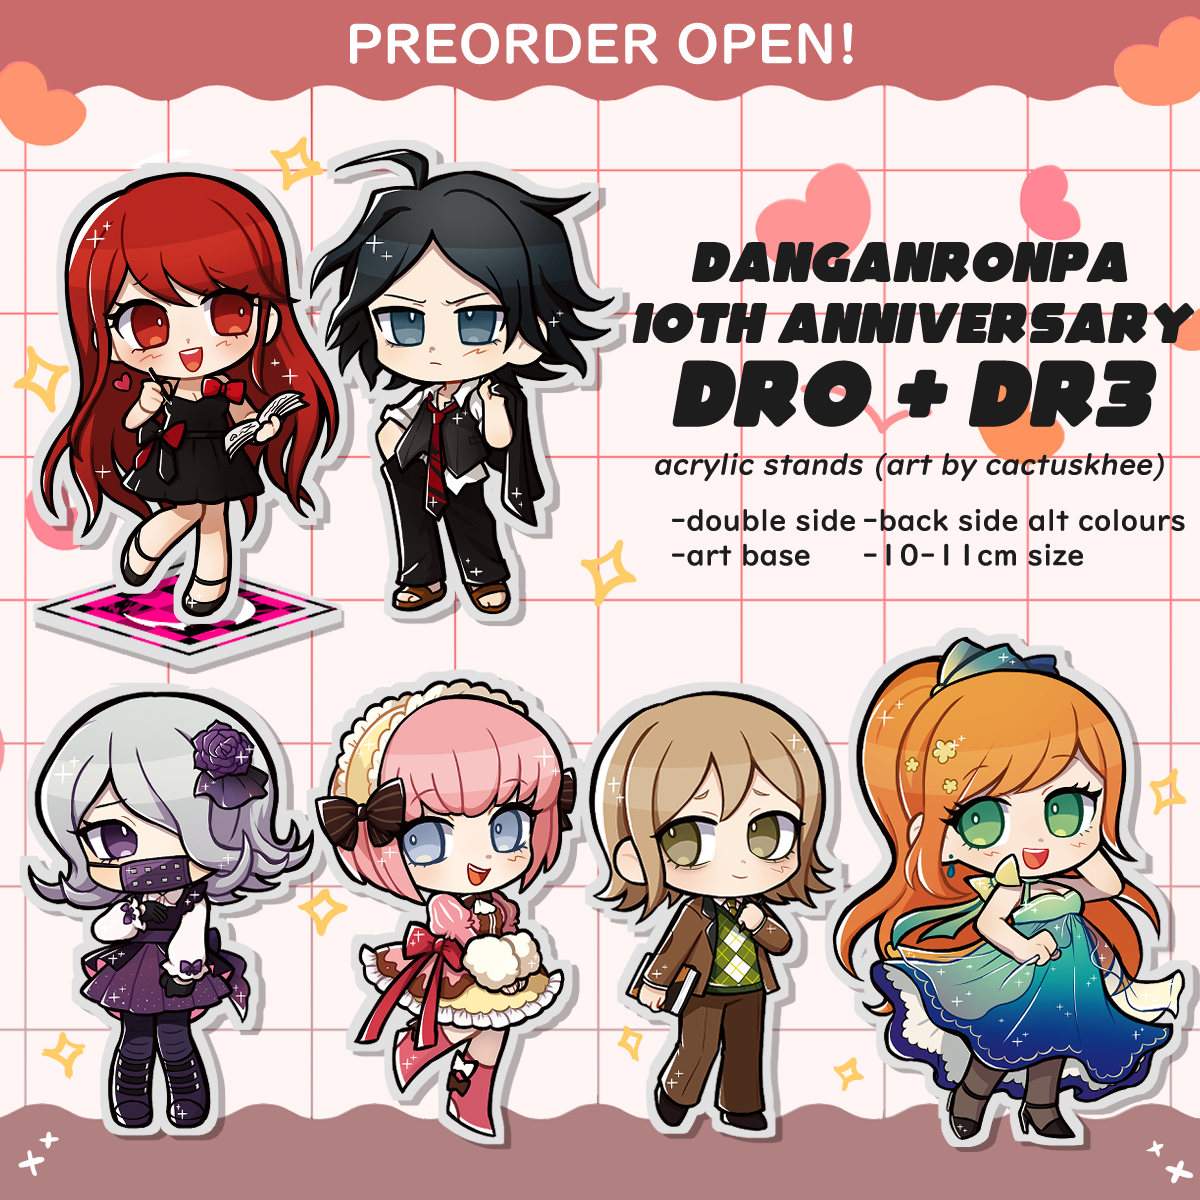 DR0+DR3 ANNI STANDS